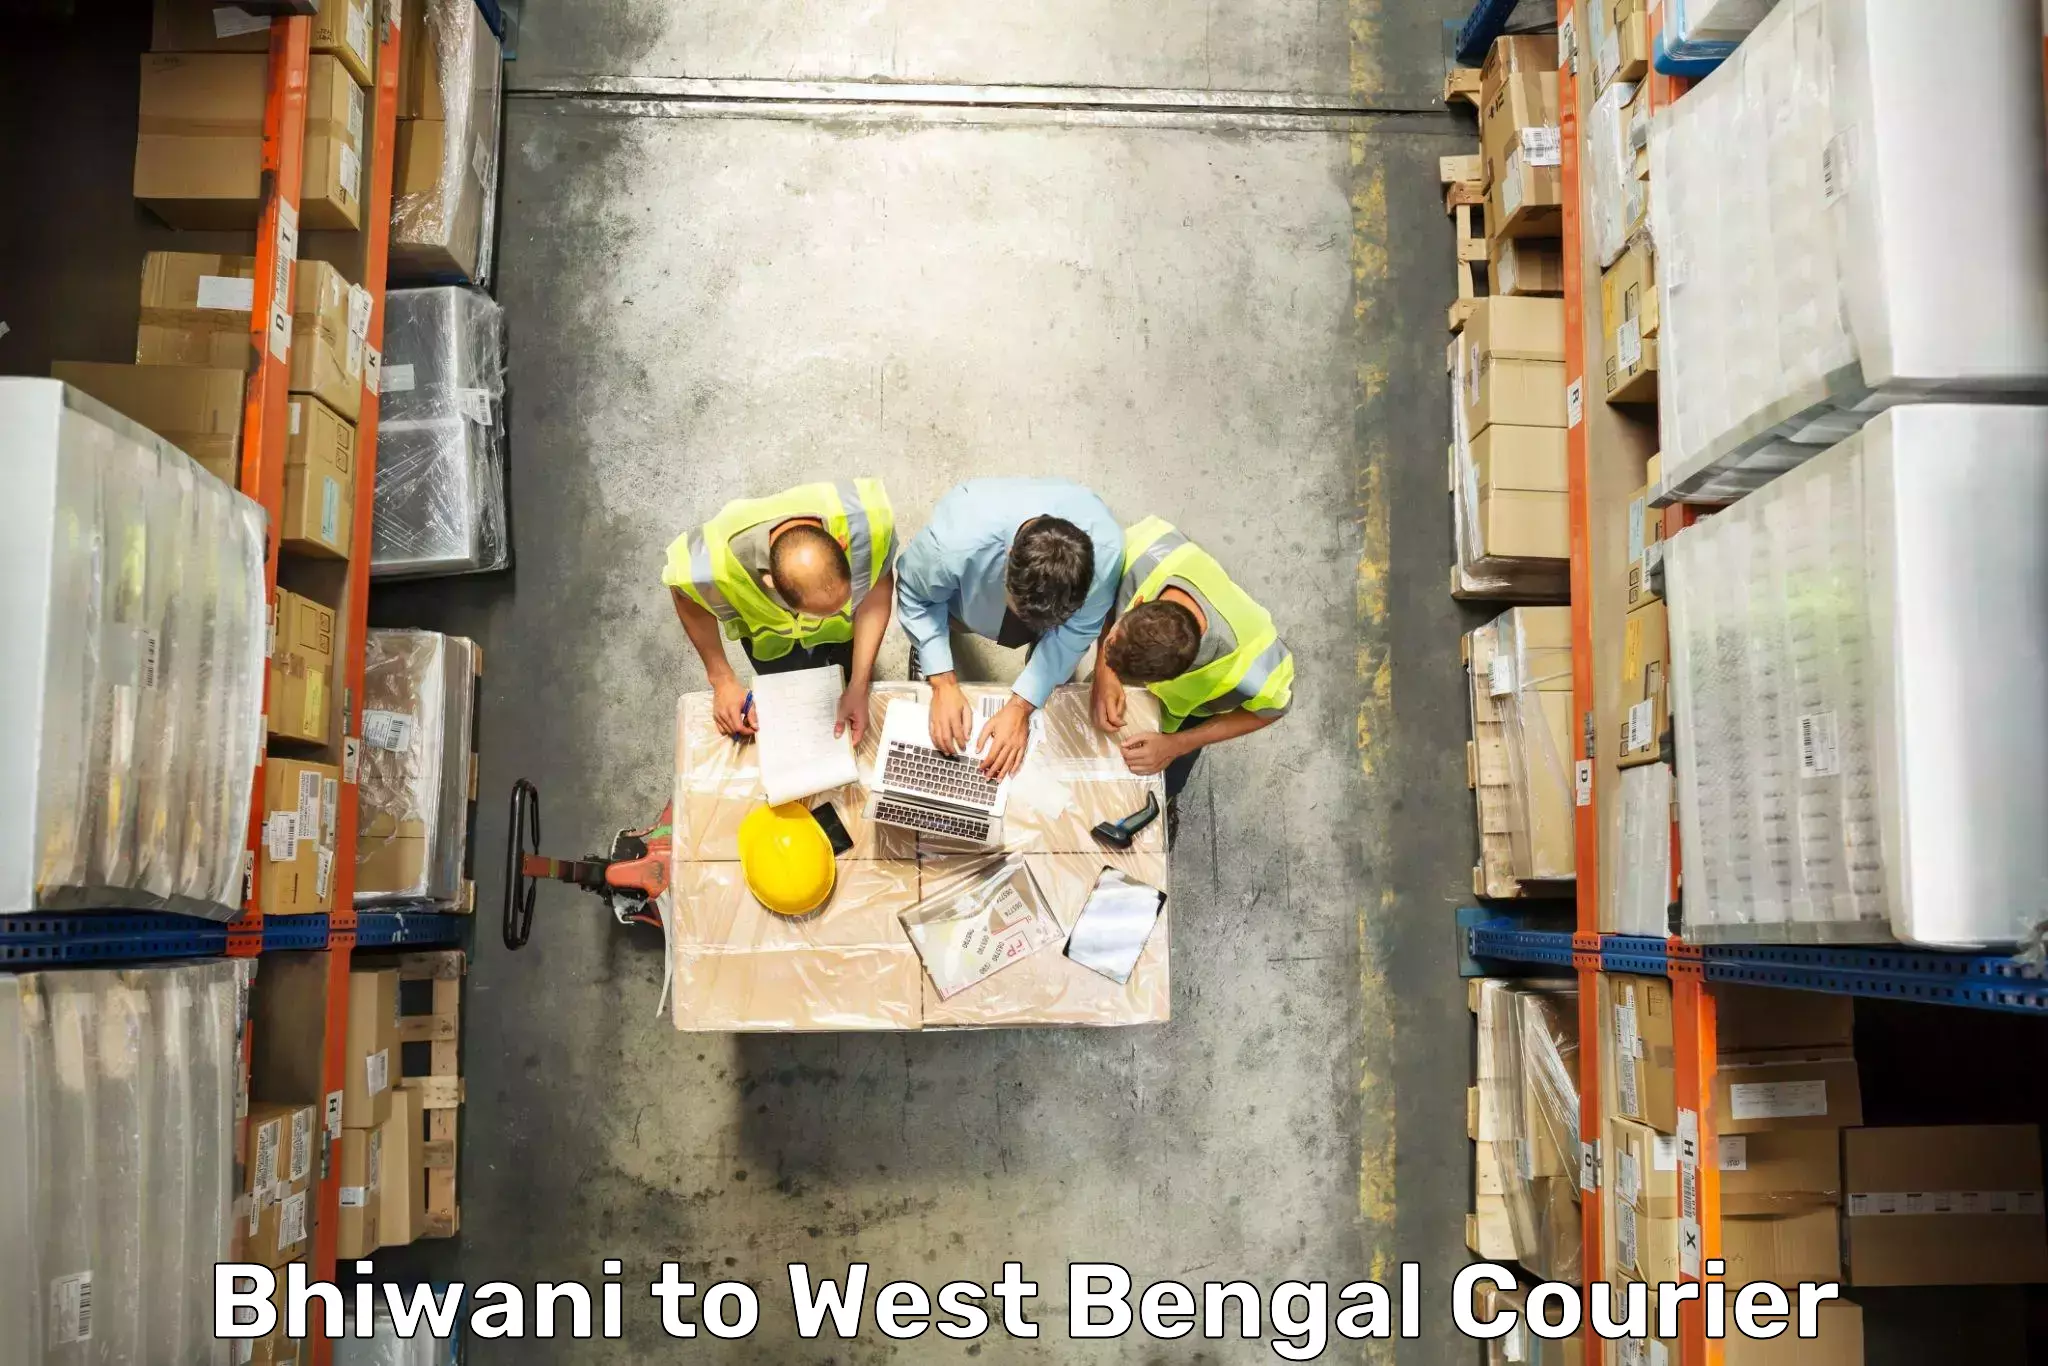 Luggage shipment specialists Bhiwani to West Bengal